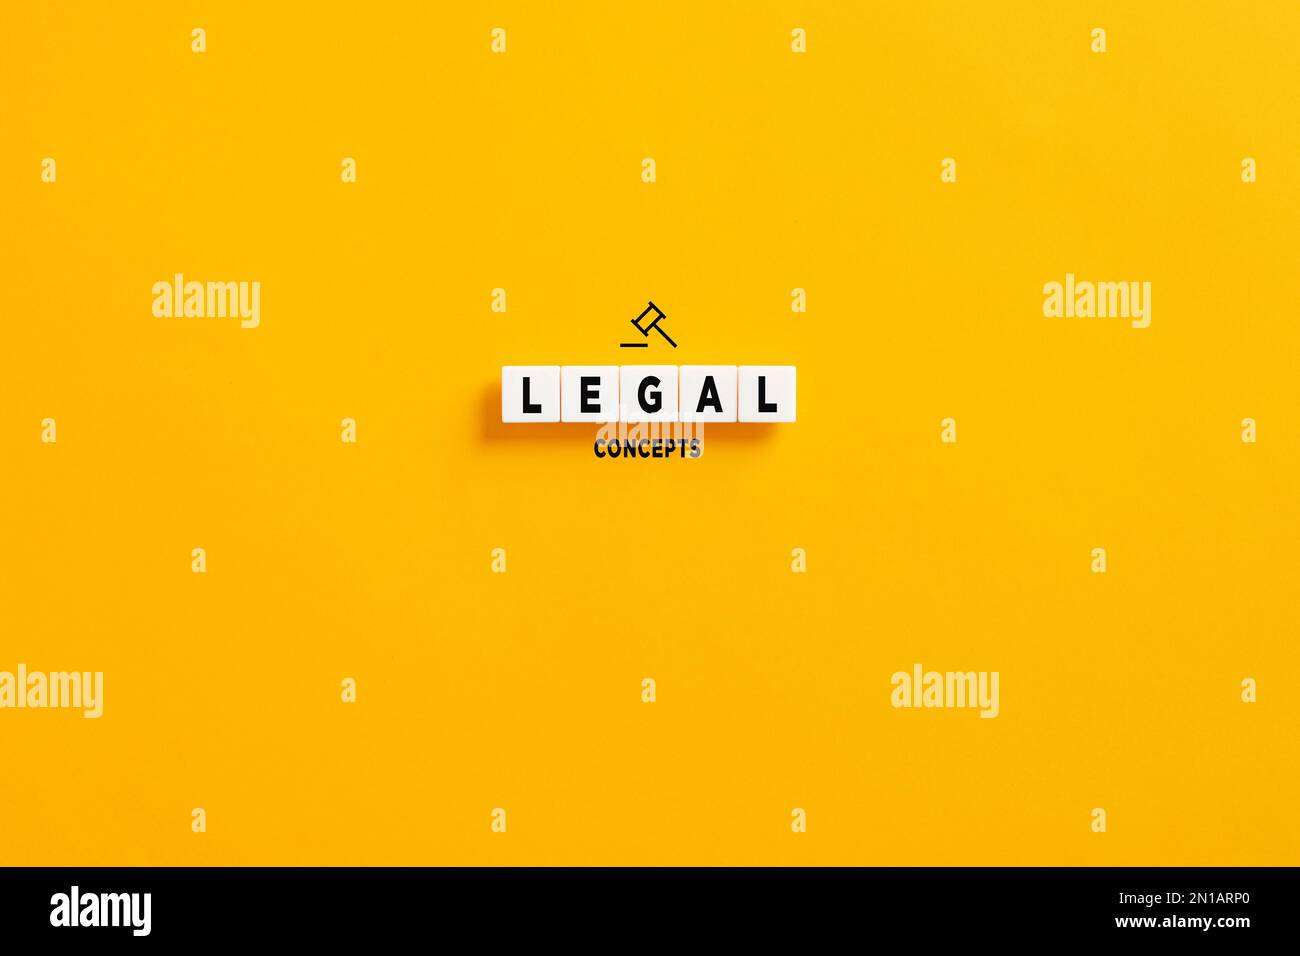 White letter blocks on yellow background with the word legal concepts. Legal regulations and policies concept. Stock Photo